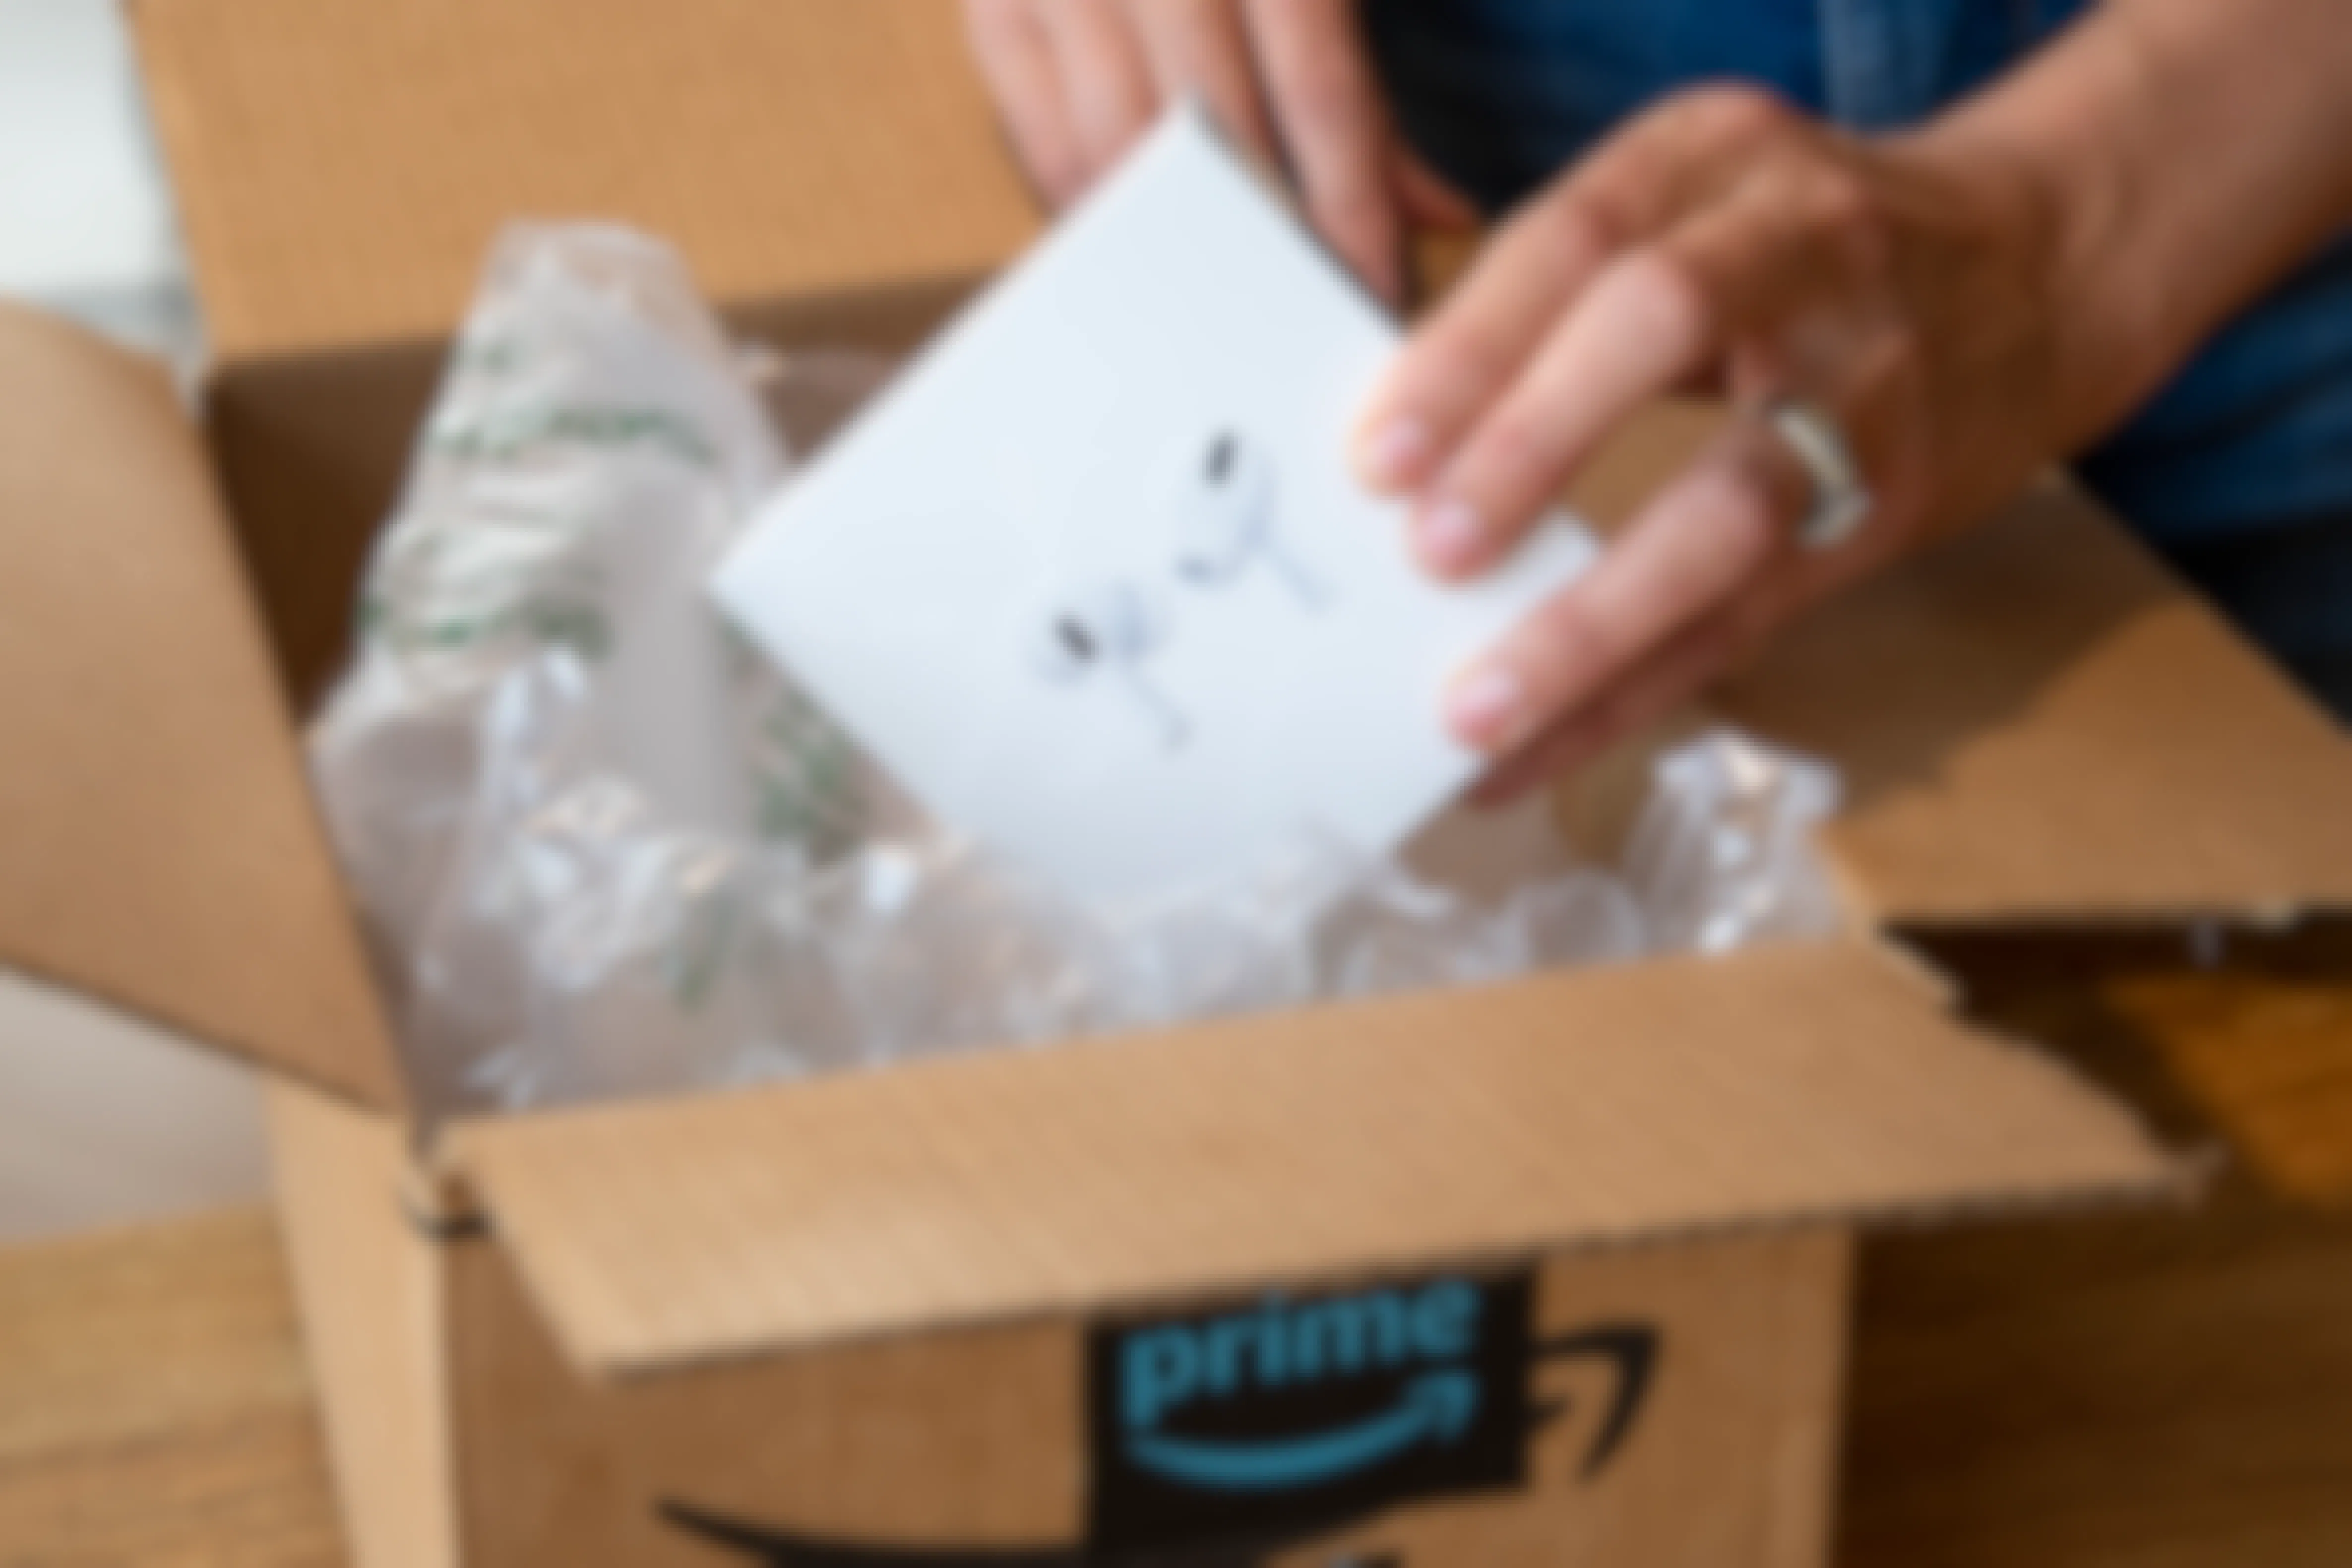 Apple Airpods box being taken out of an Amazon Prime box.